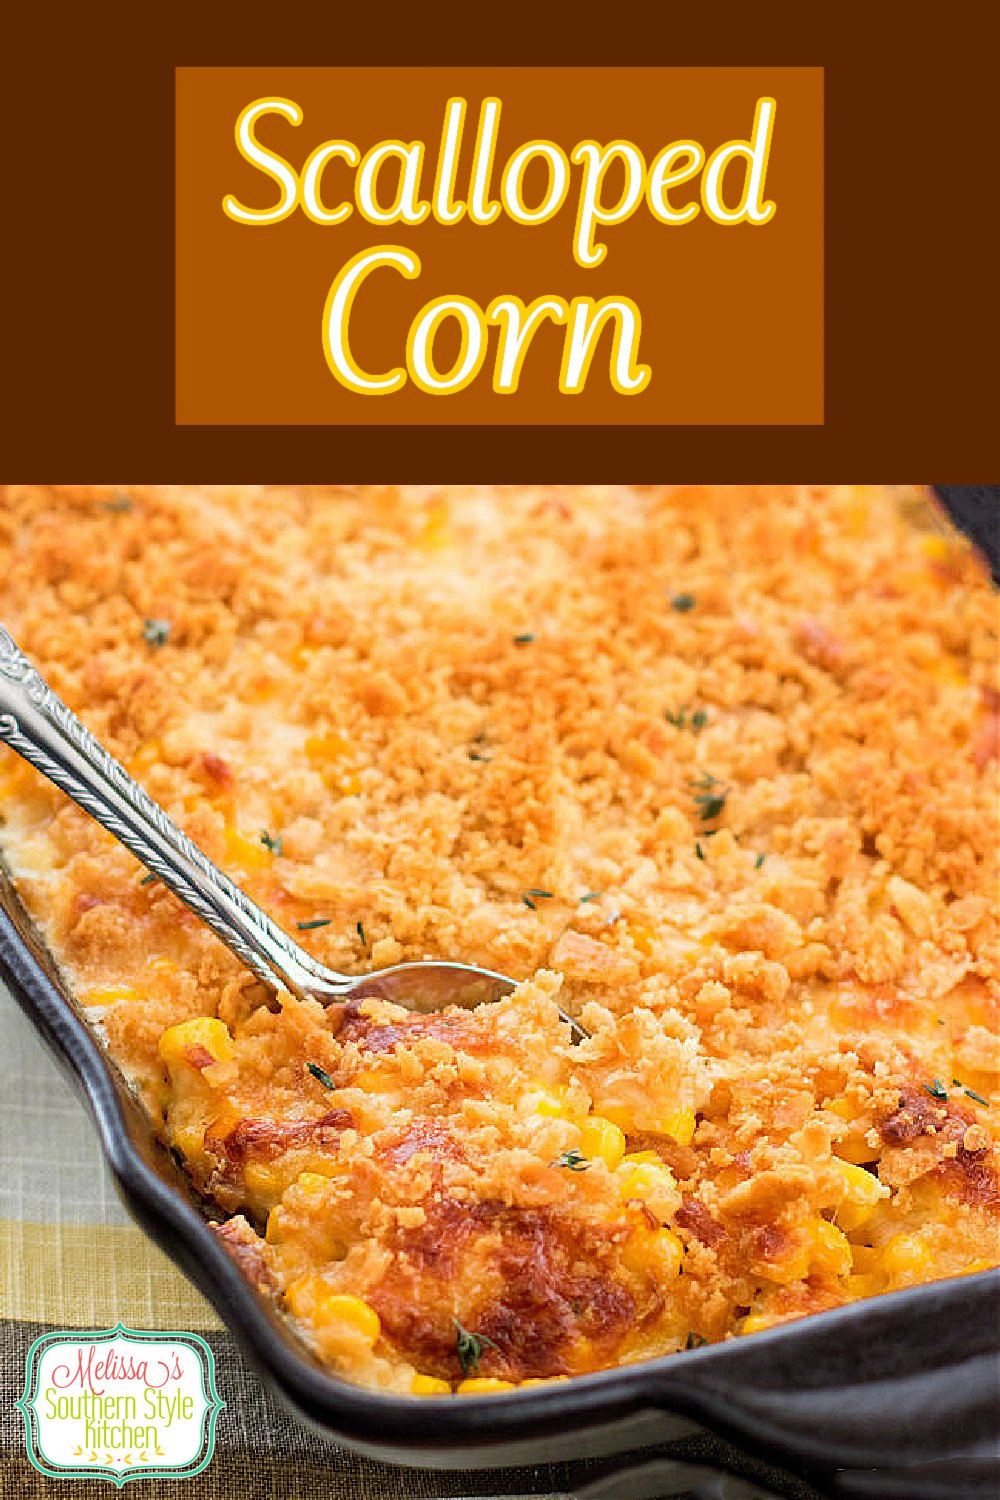 Cheesy Scalloped Corn is a sweet and salty side dish you'll love year-round #corncasserole #scallopedcorn #holidaysidedishes #easter #thanksgiving #christmas #corn #siddish #dinnerideas #southernfood #southernrecipes #melissassouthernstylekitchen via @melissasssk